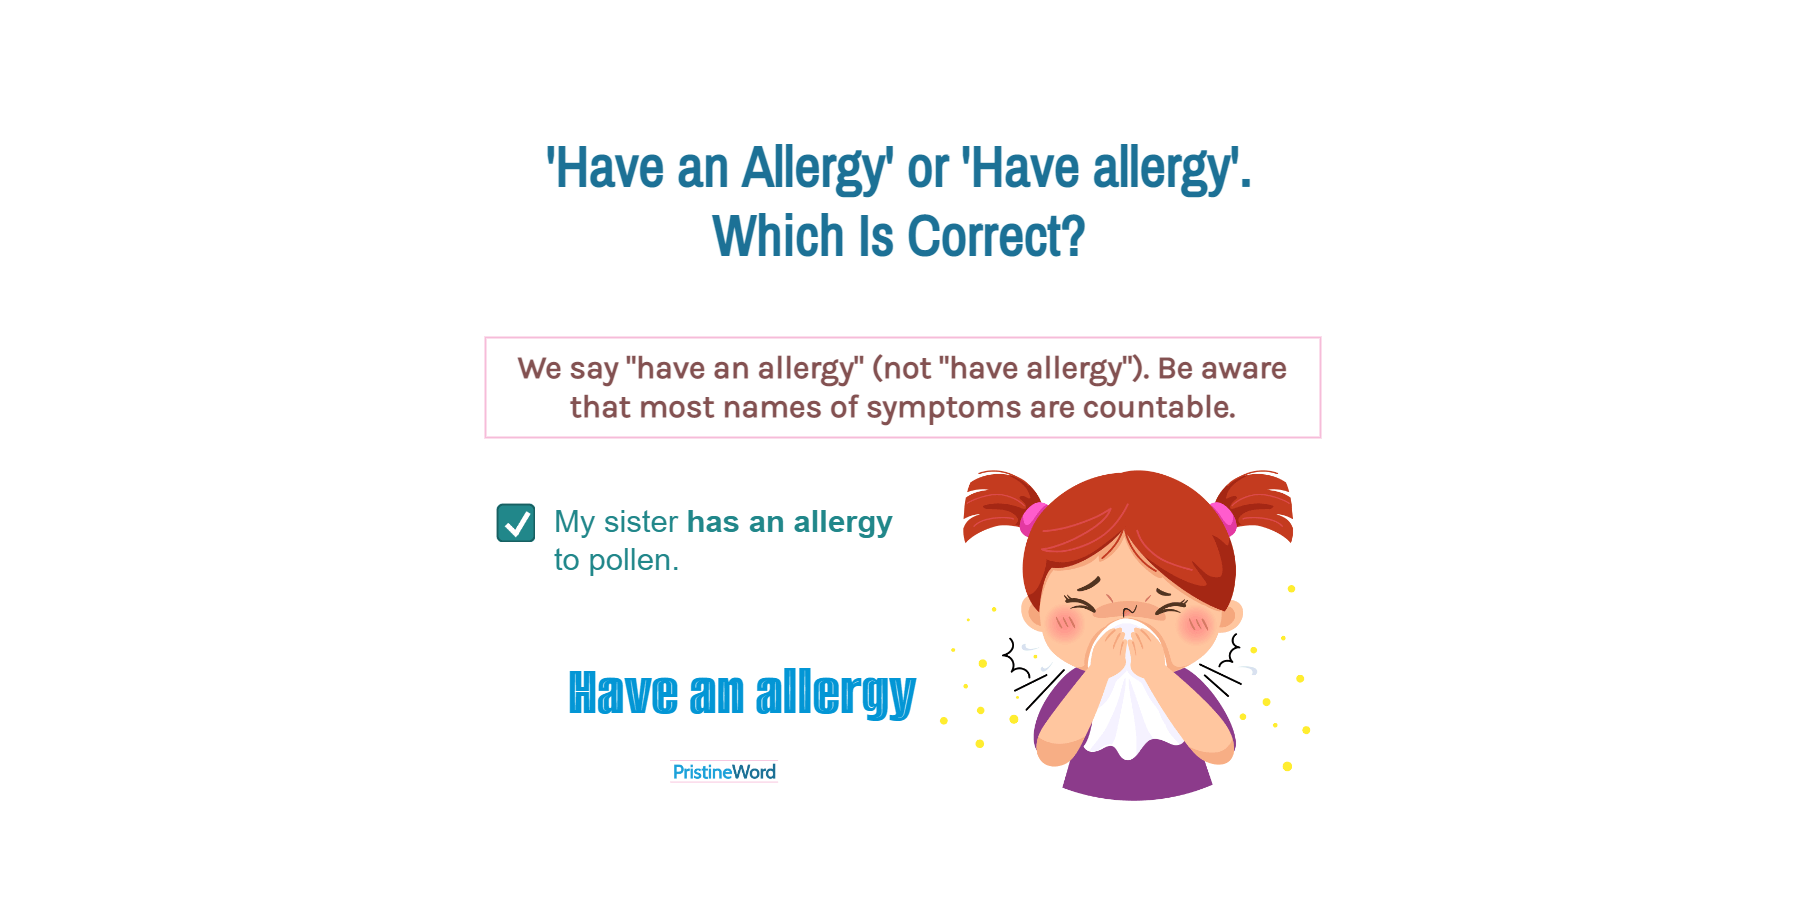 Have an Allergy or Have Allergy. Which Is Correct?